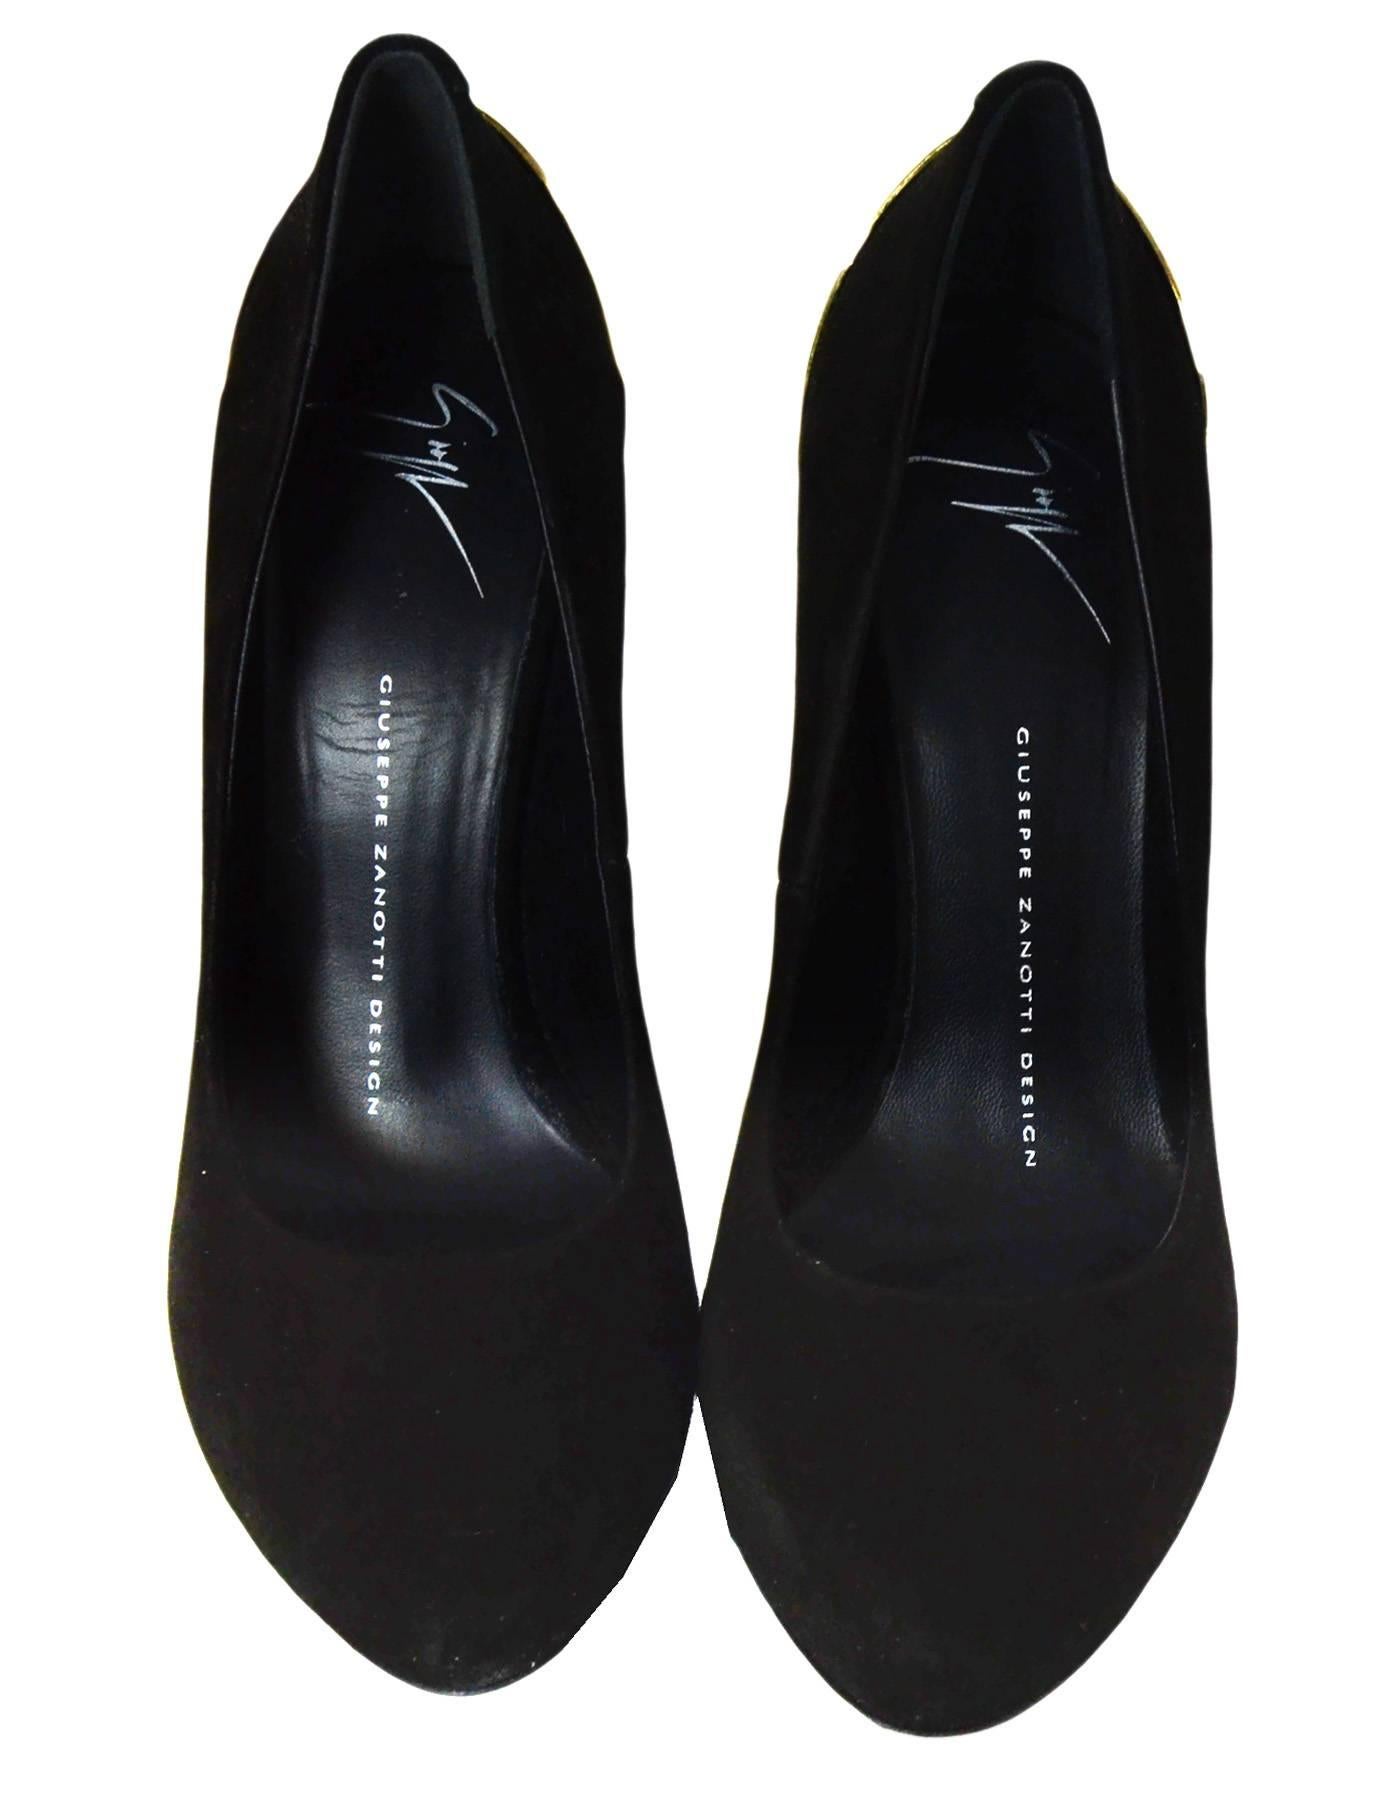 Giuseppe Zanotti Black Suede & Gold Pumps Sz 38 with Box, DB In Excellent Condition In New York, NY